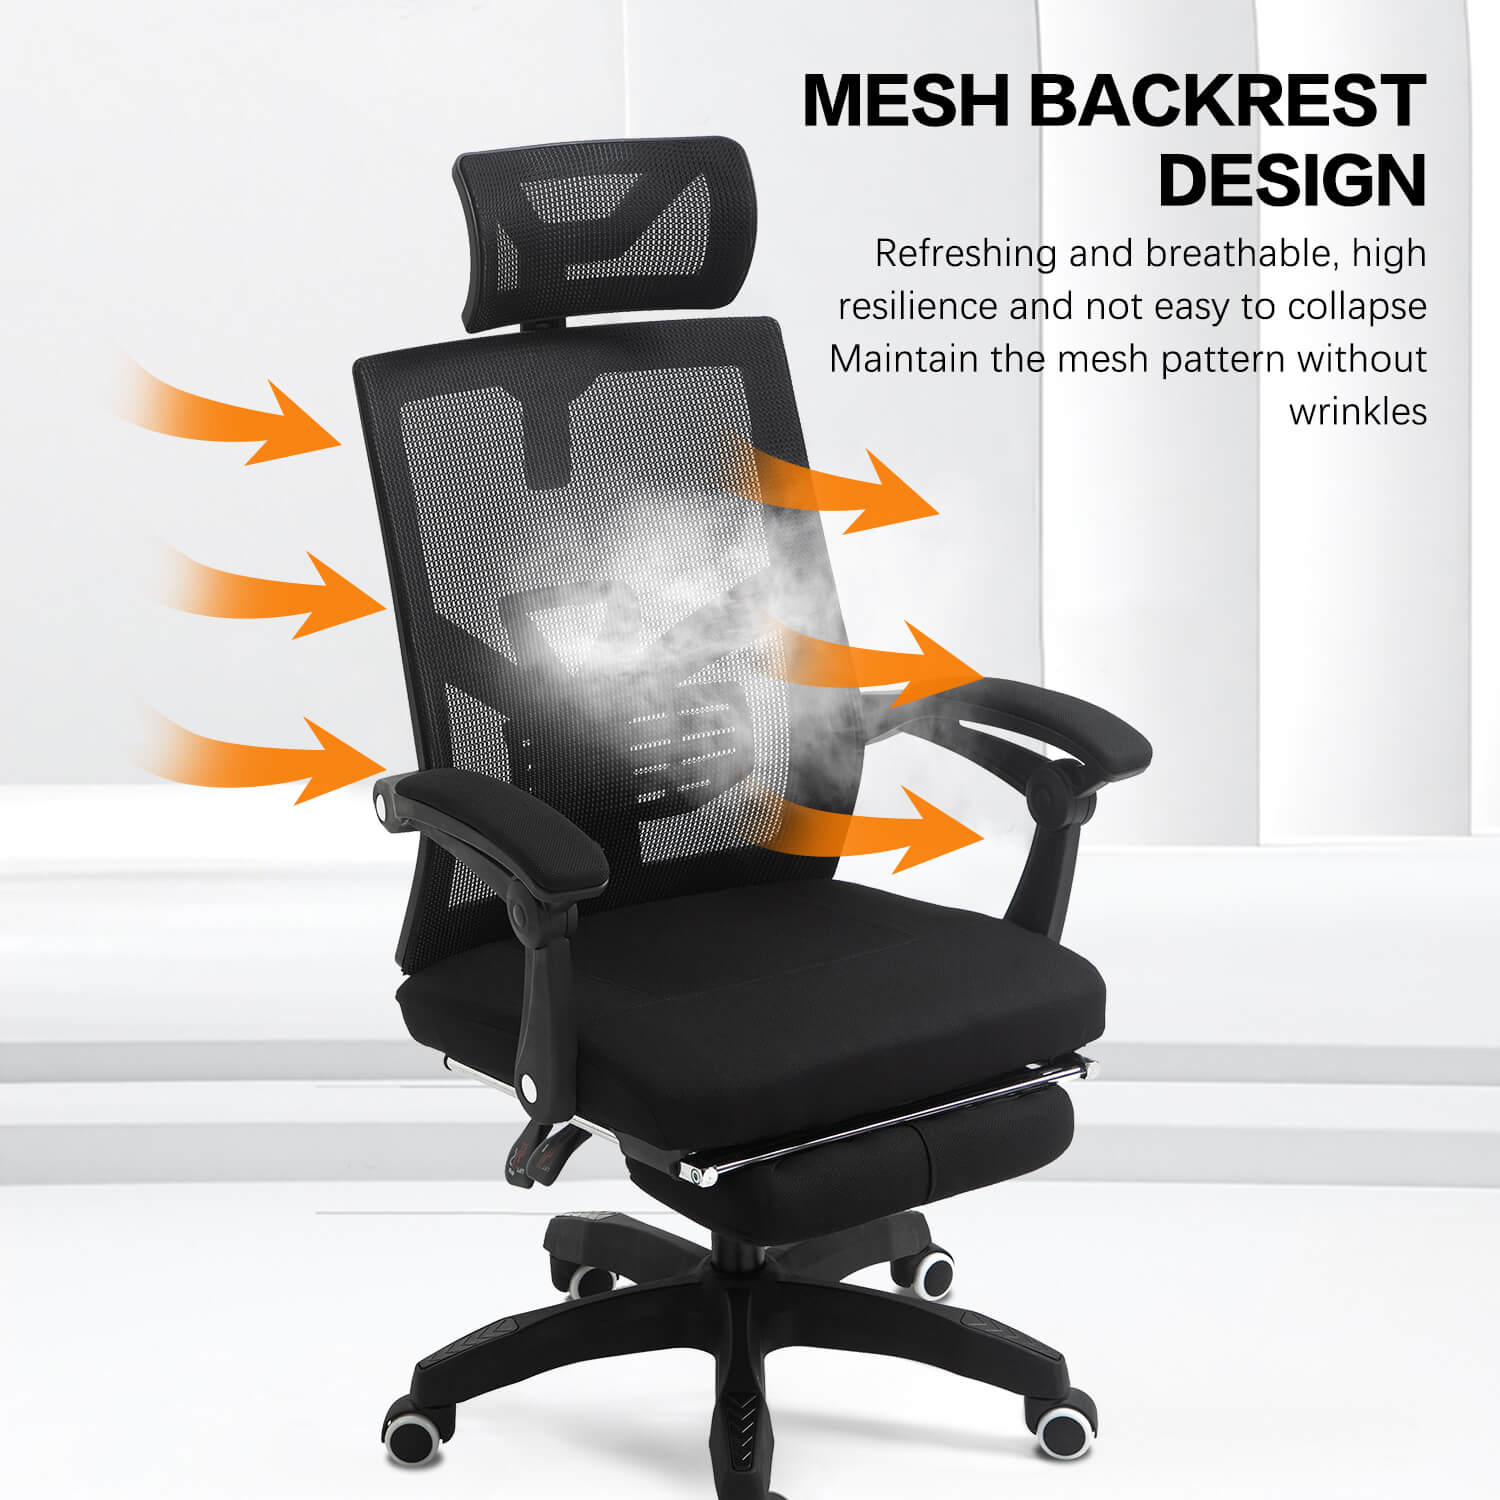 Does an ergonomic office chair with lumbar support really benefit